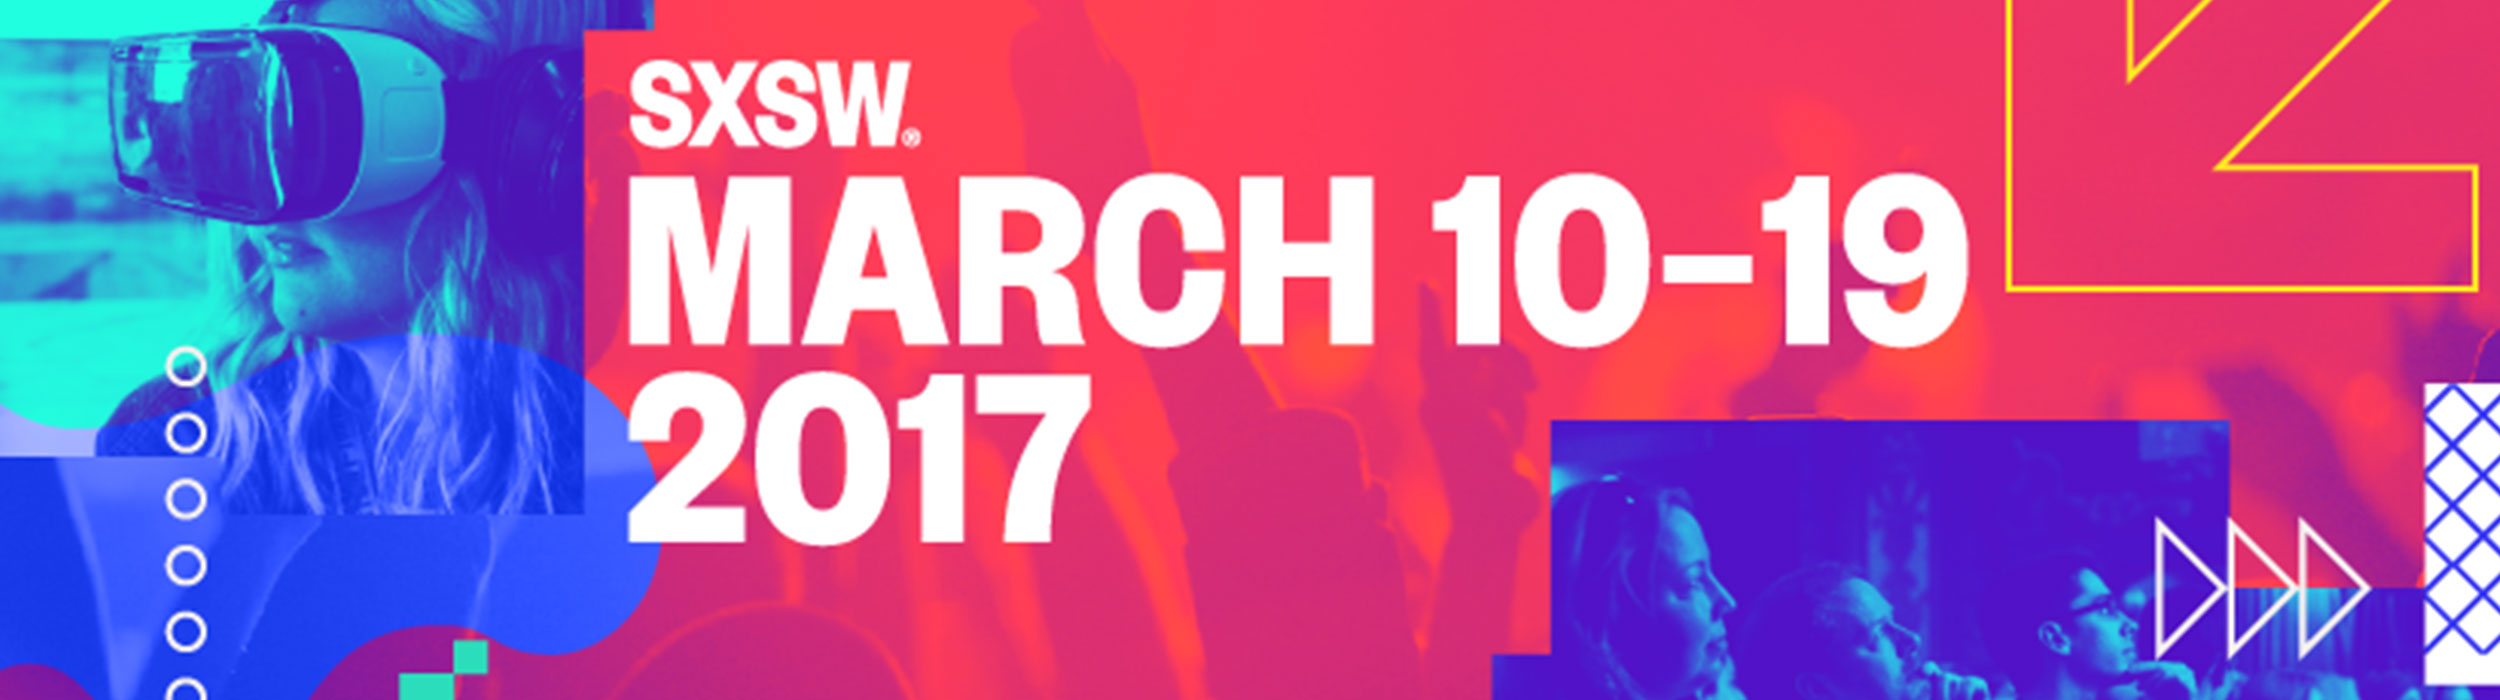 South by Southwest banner image depicting the date of March 10th to March 19th, 2017.